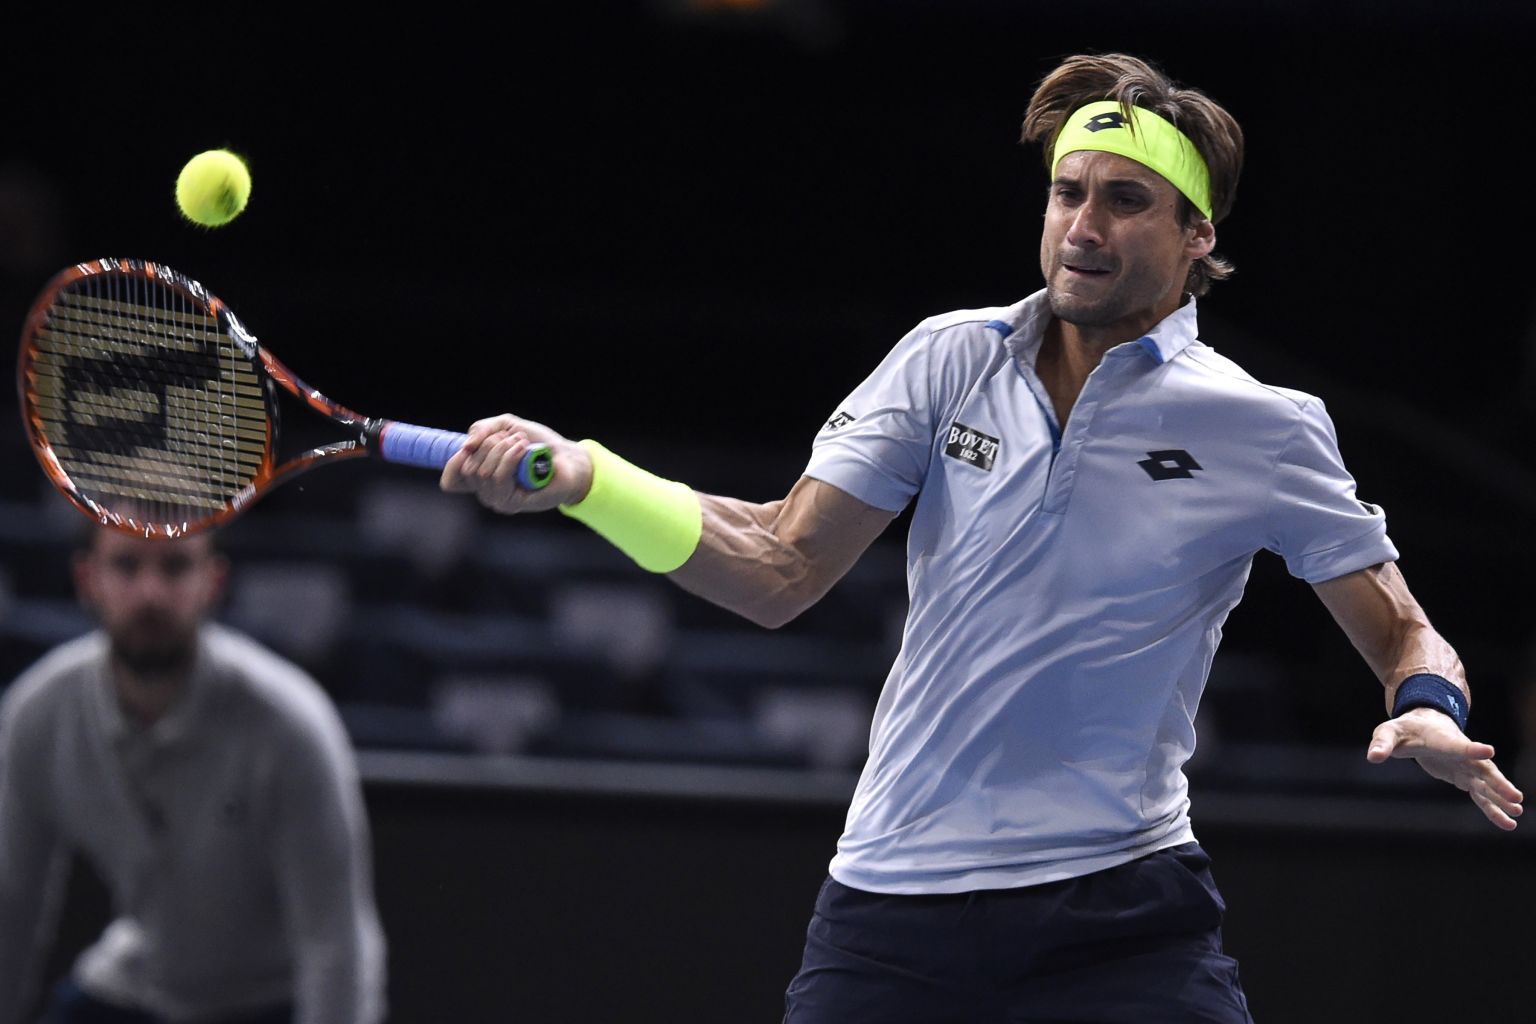 Spain's David Ferrer returns the ball to Ukraine's Alexandr Dolgopolov during their first round tennis match at the ATP World Tour Masters 1000 indoor tennis tournament in Paris on November 3, 2015. AFP PHOTO / MIGUEL MEDINA        (Photo credit should read MIGUEL MEDINA/AFP/Getty Images)